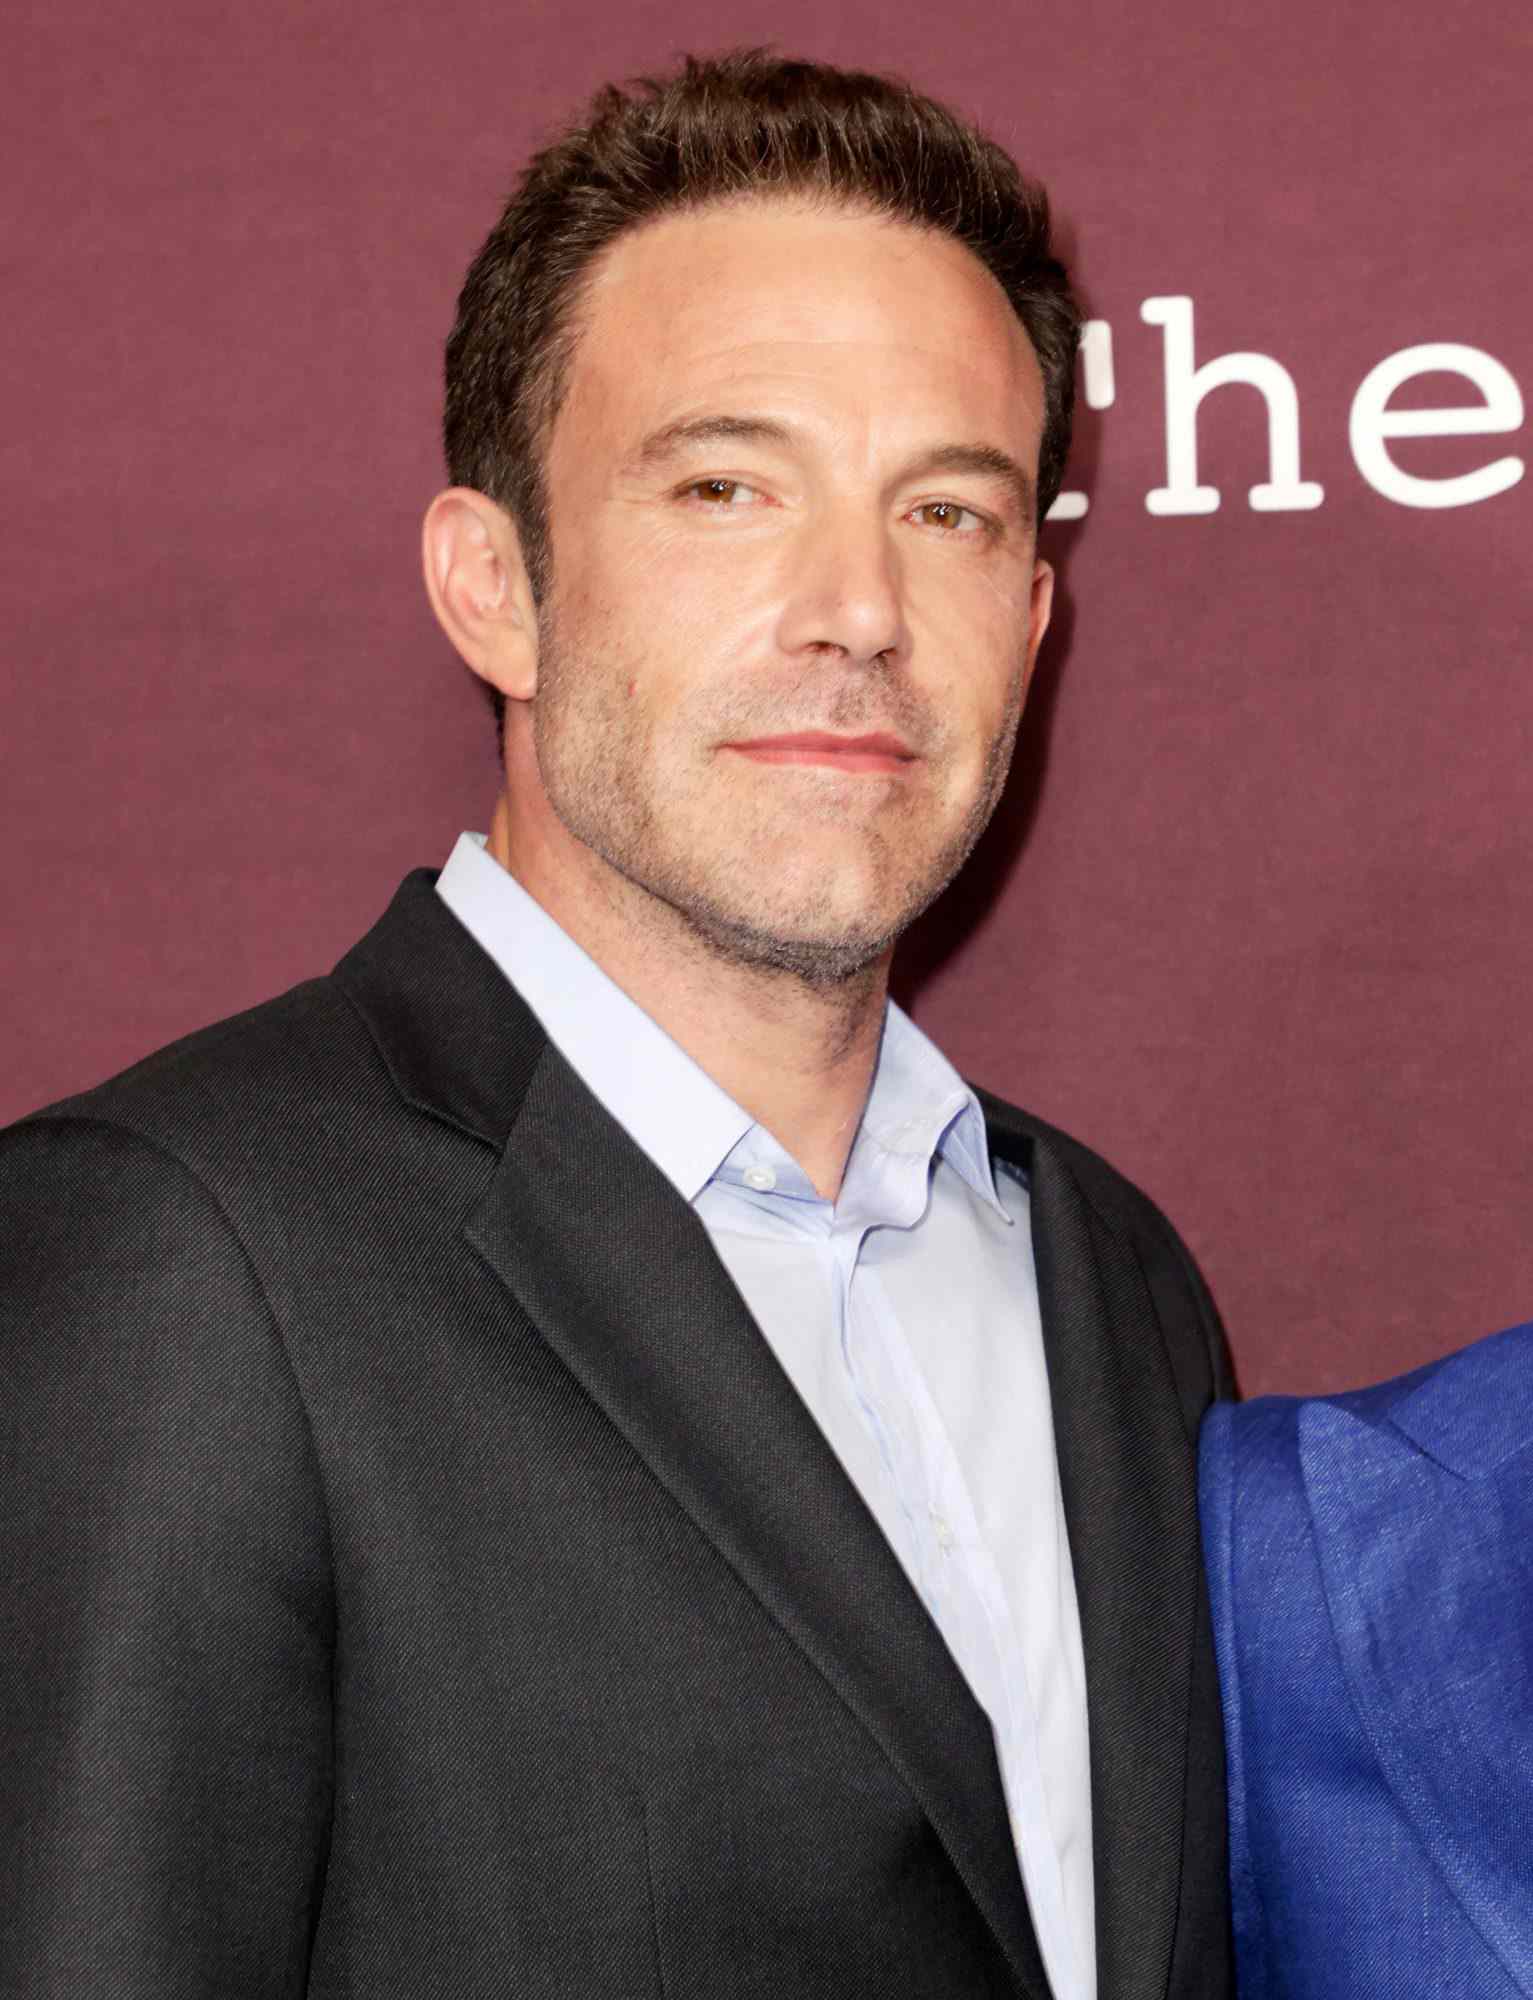 Ben Affleck attends the Los Angeles Premiere of "The Tender Bar" presented by Amazon Studios at DGA Theater Complex on October 03, 2021 in Los Angeles